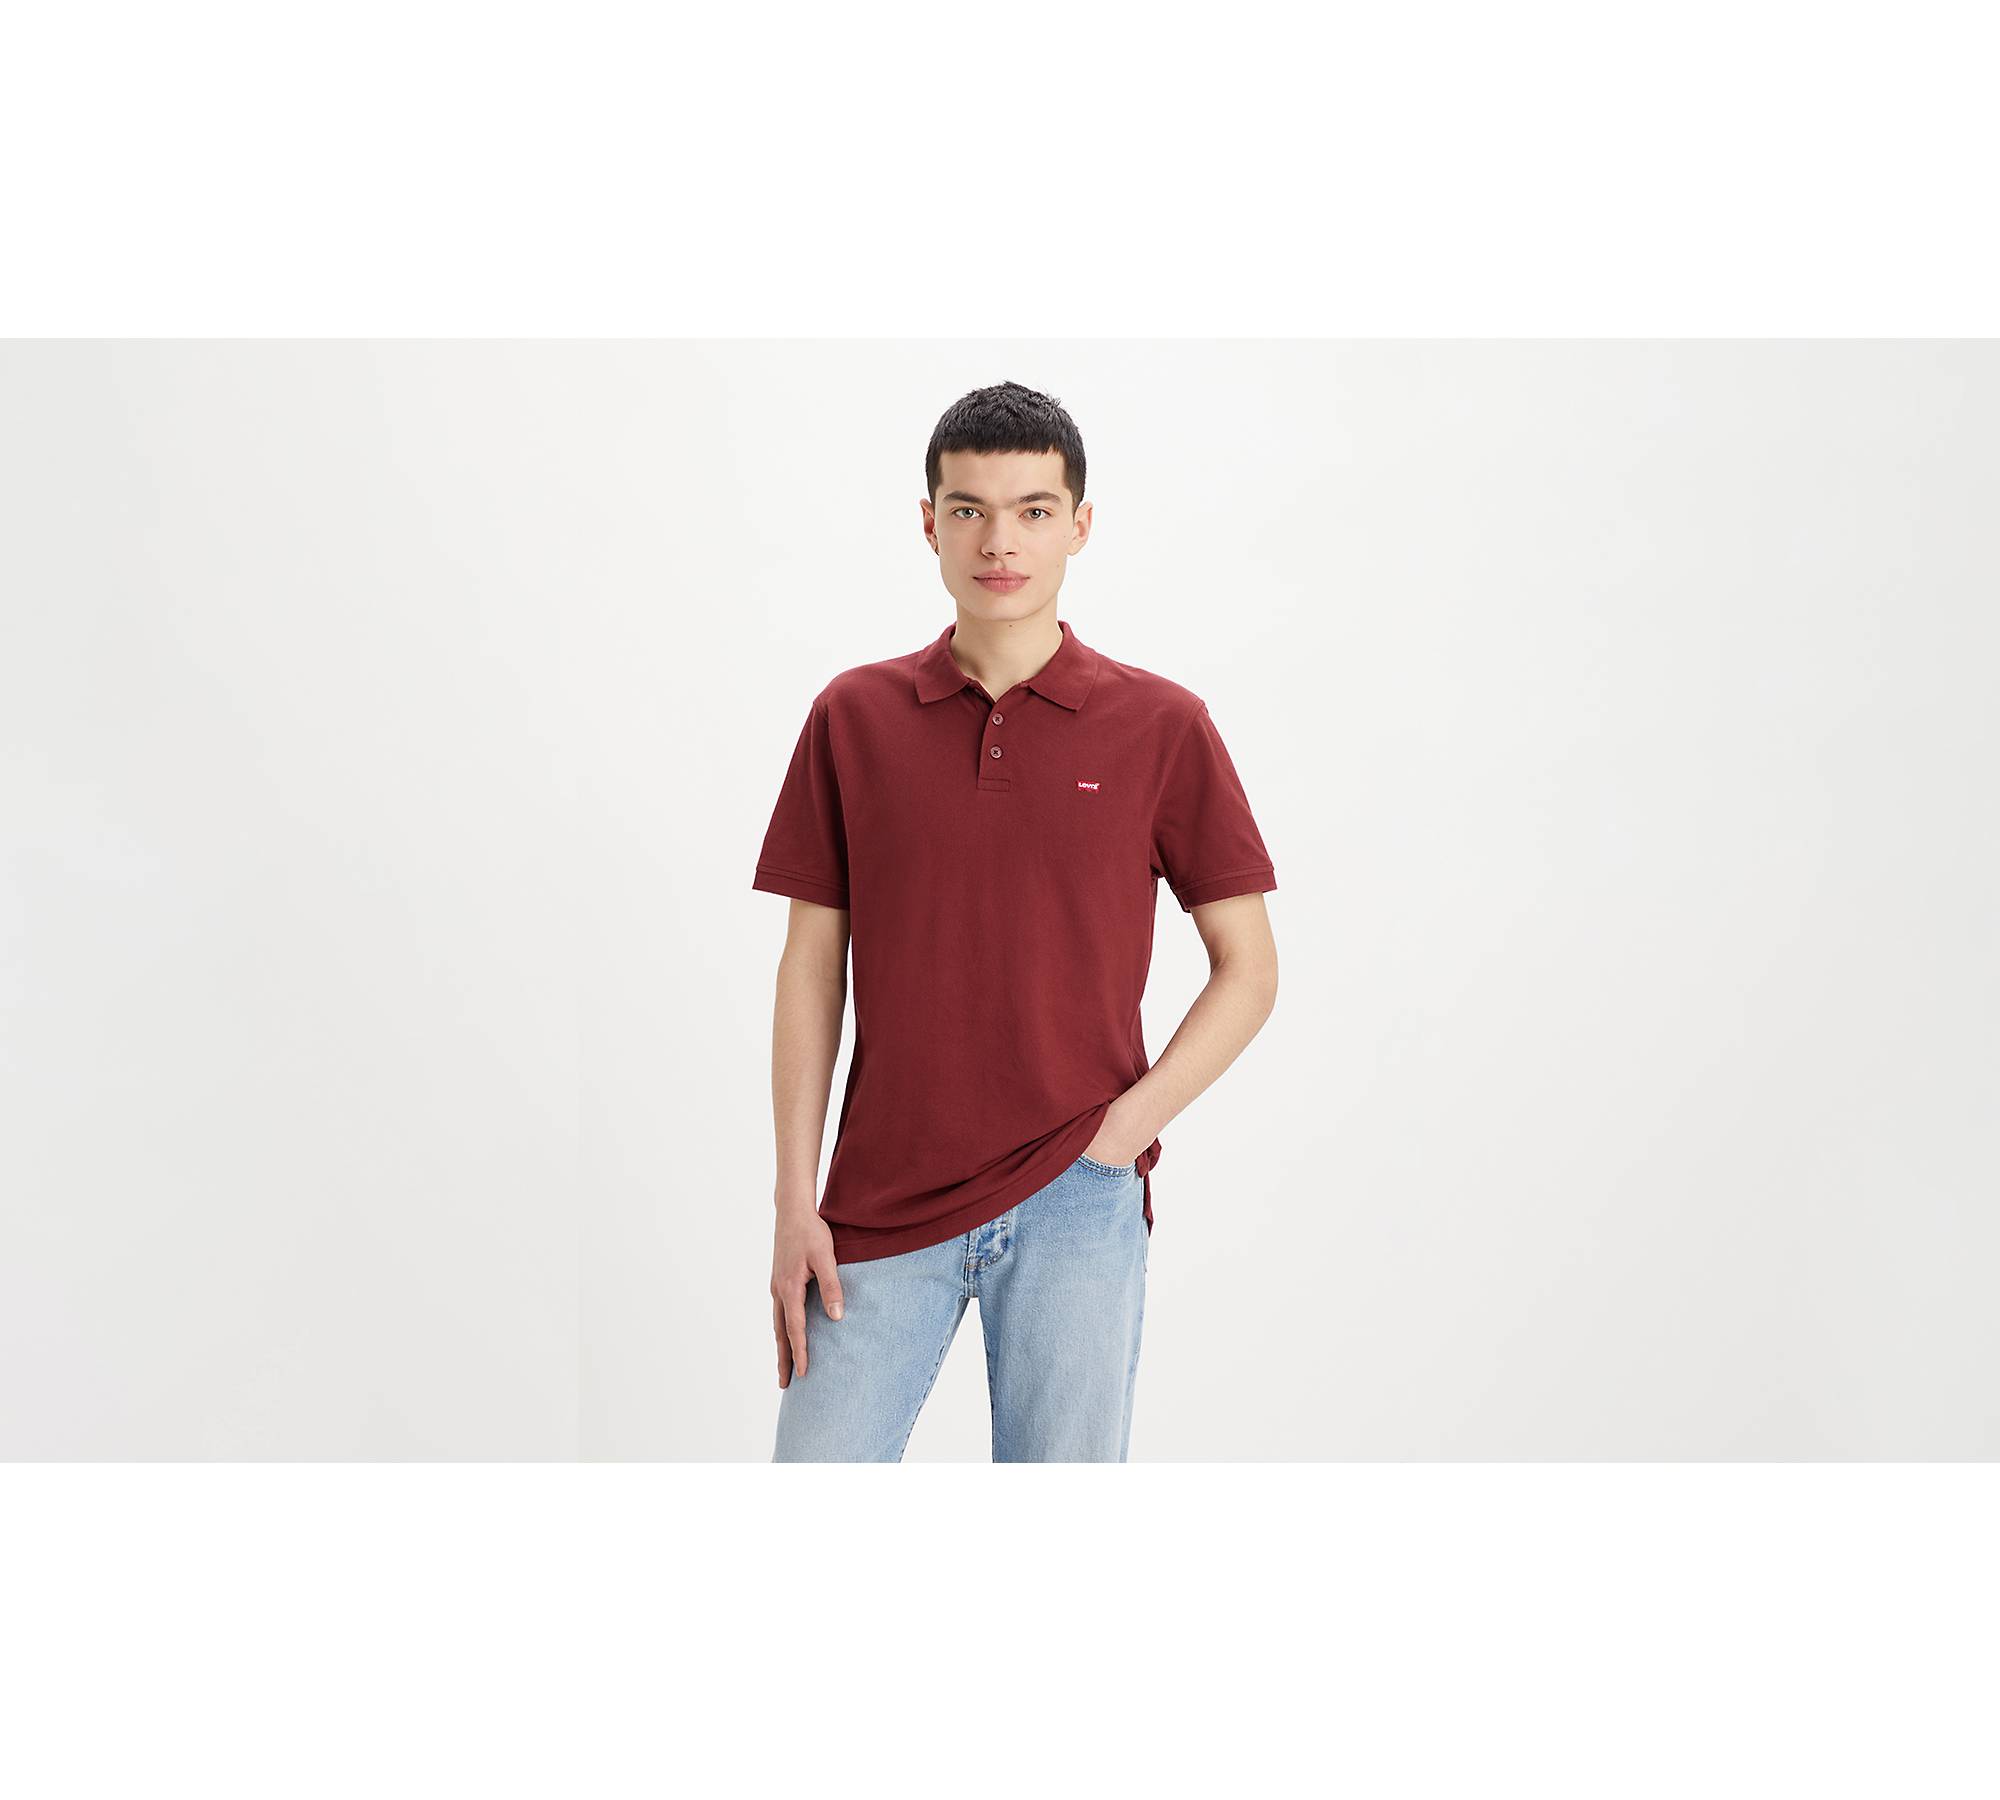 Lacoste Red Polo Shirt - Red / S